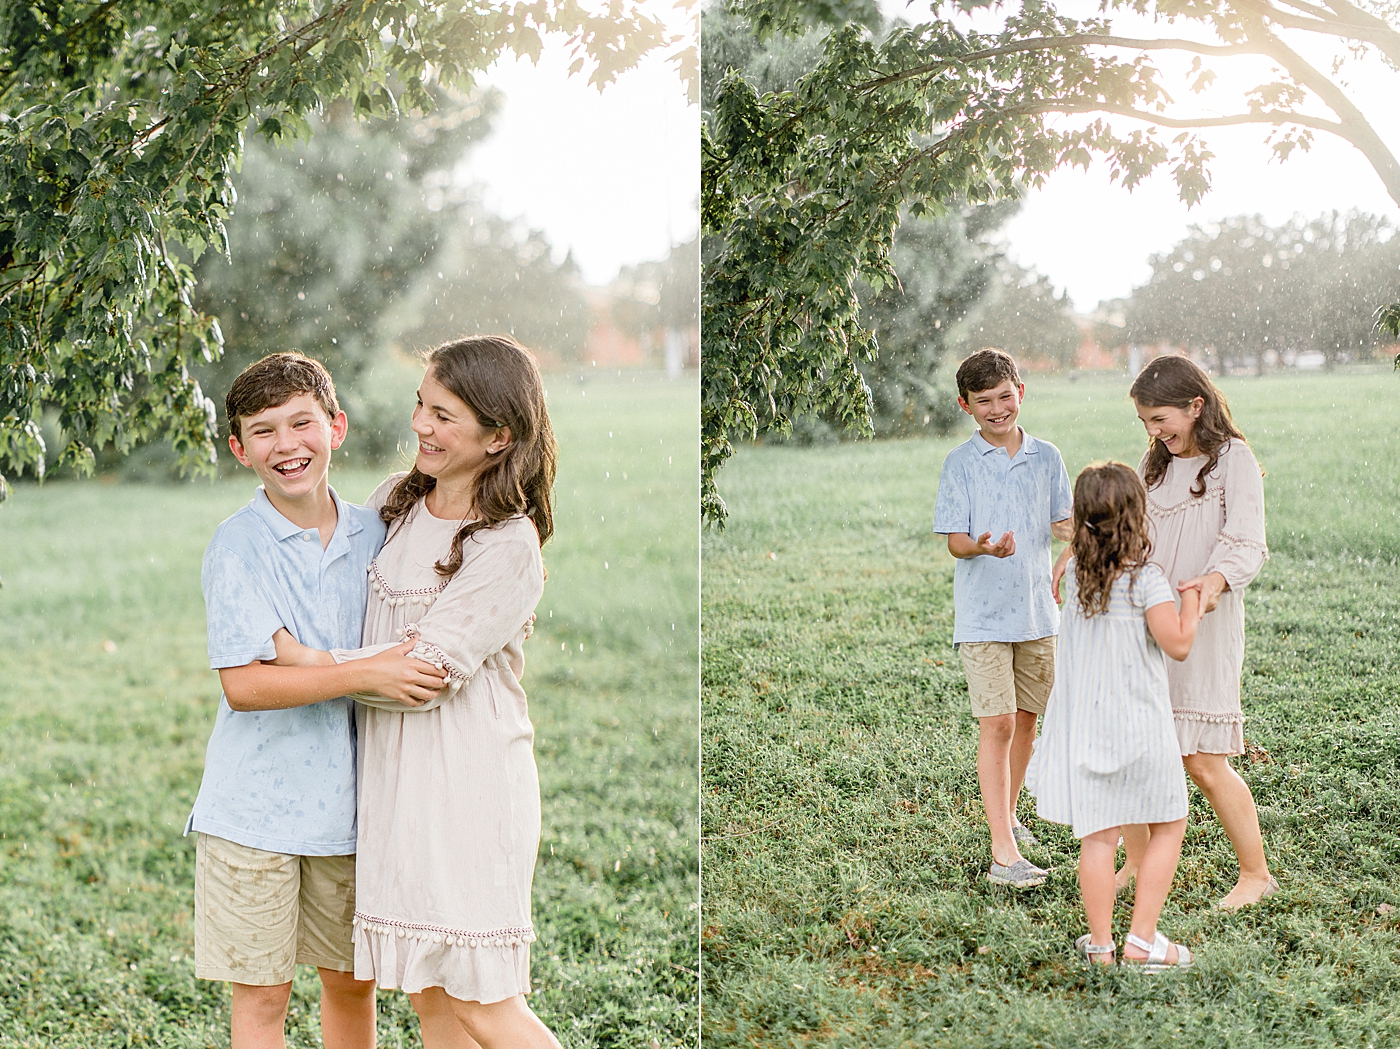 Mom playing with her kids in the rain during photoshoot. Photo by Brittany Elise Photography.